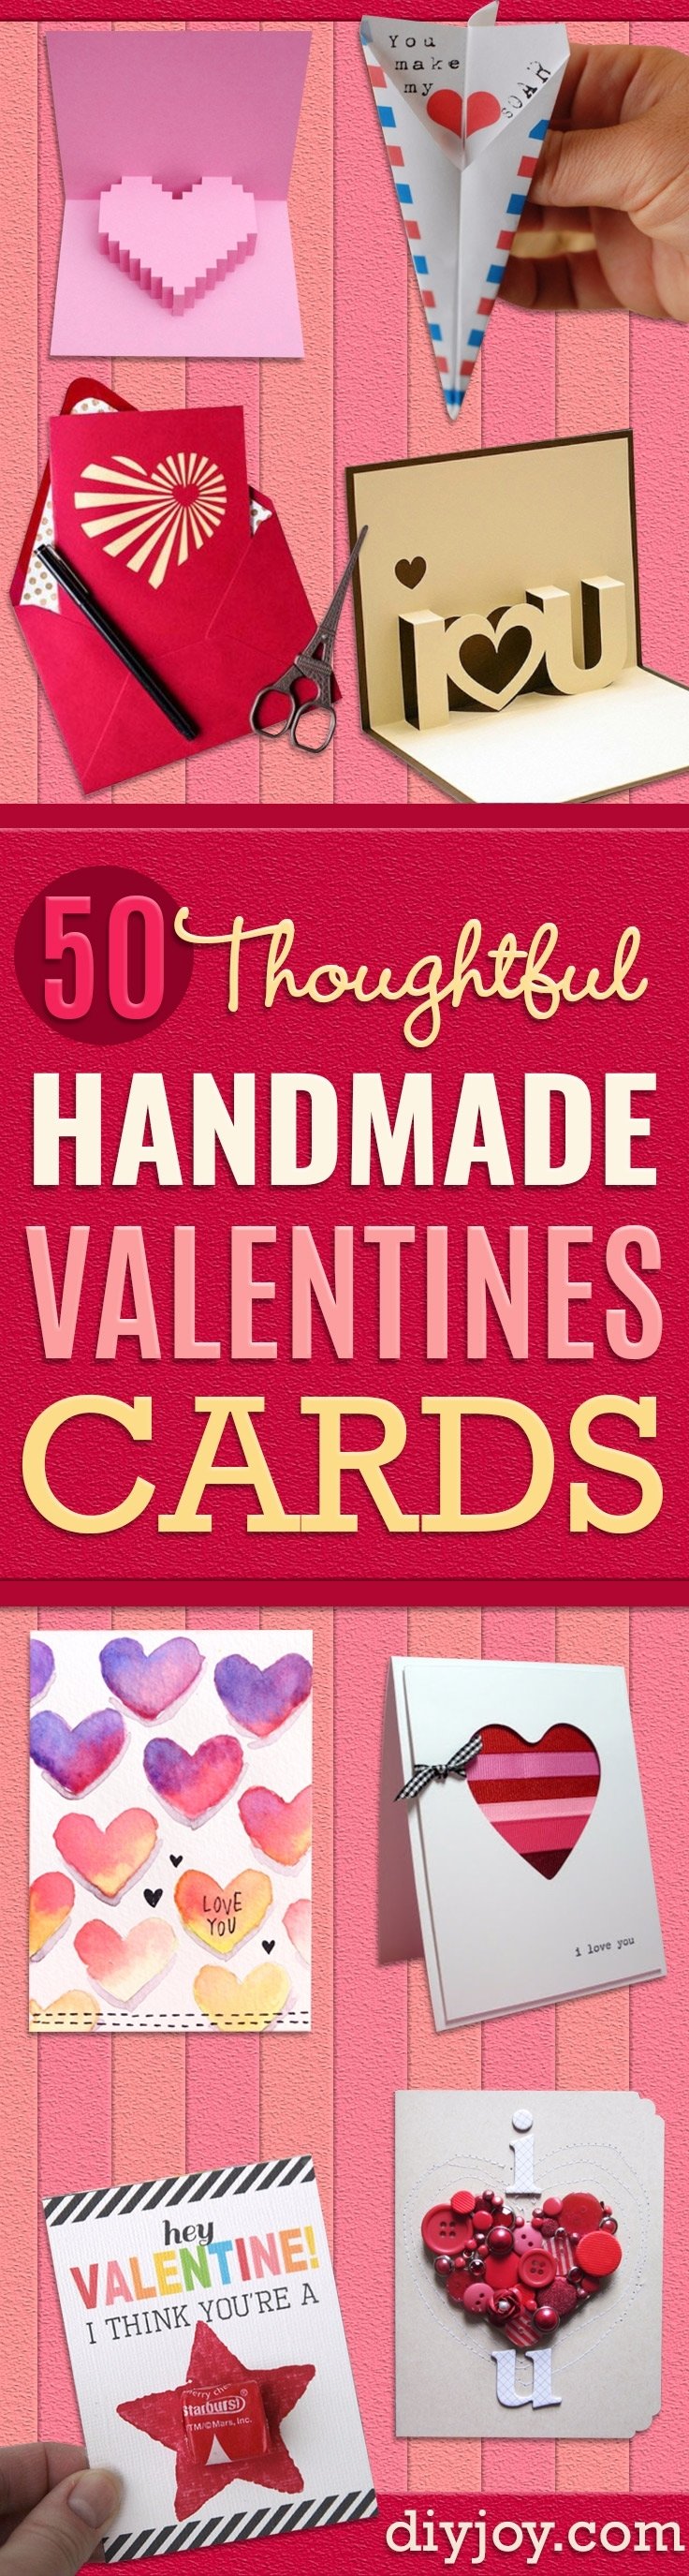 10 Lovable Homemade Valentines Ideas For Him 50 thoughtful handmade valentines cards 2023